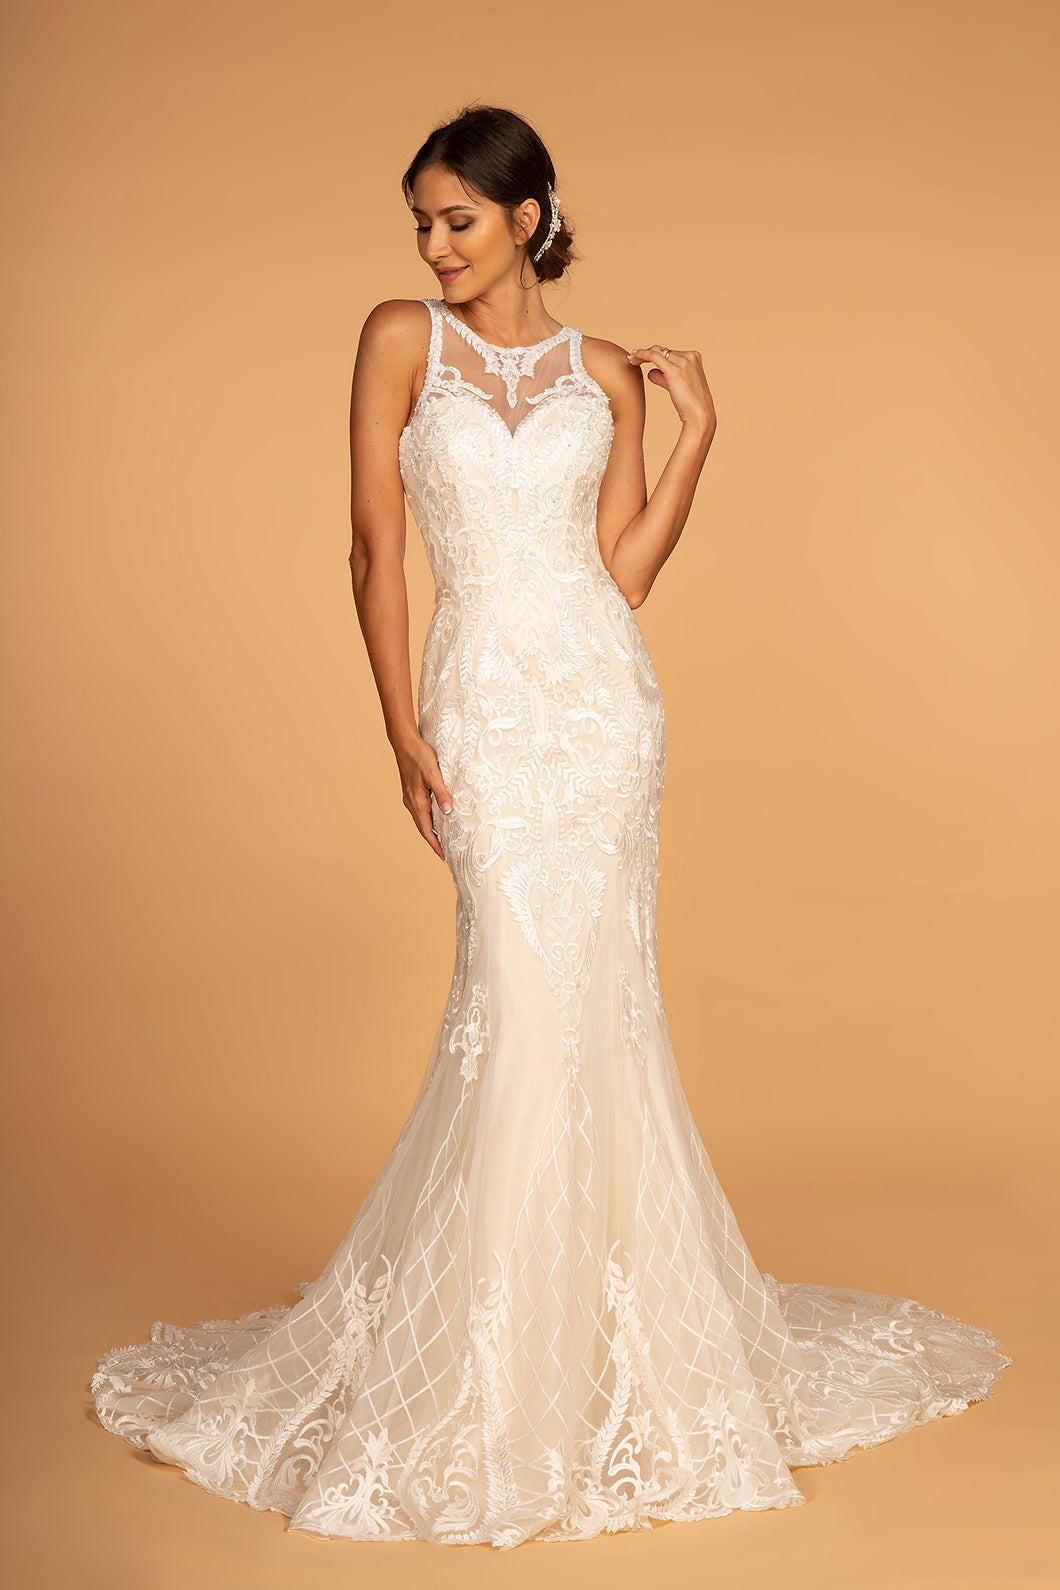 Kelly Wedding Dress Halter Neckline with Keyhole Back 2602598IRR-Ivory/champagne SAMPLE IN STORE